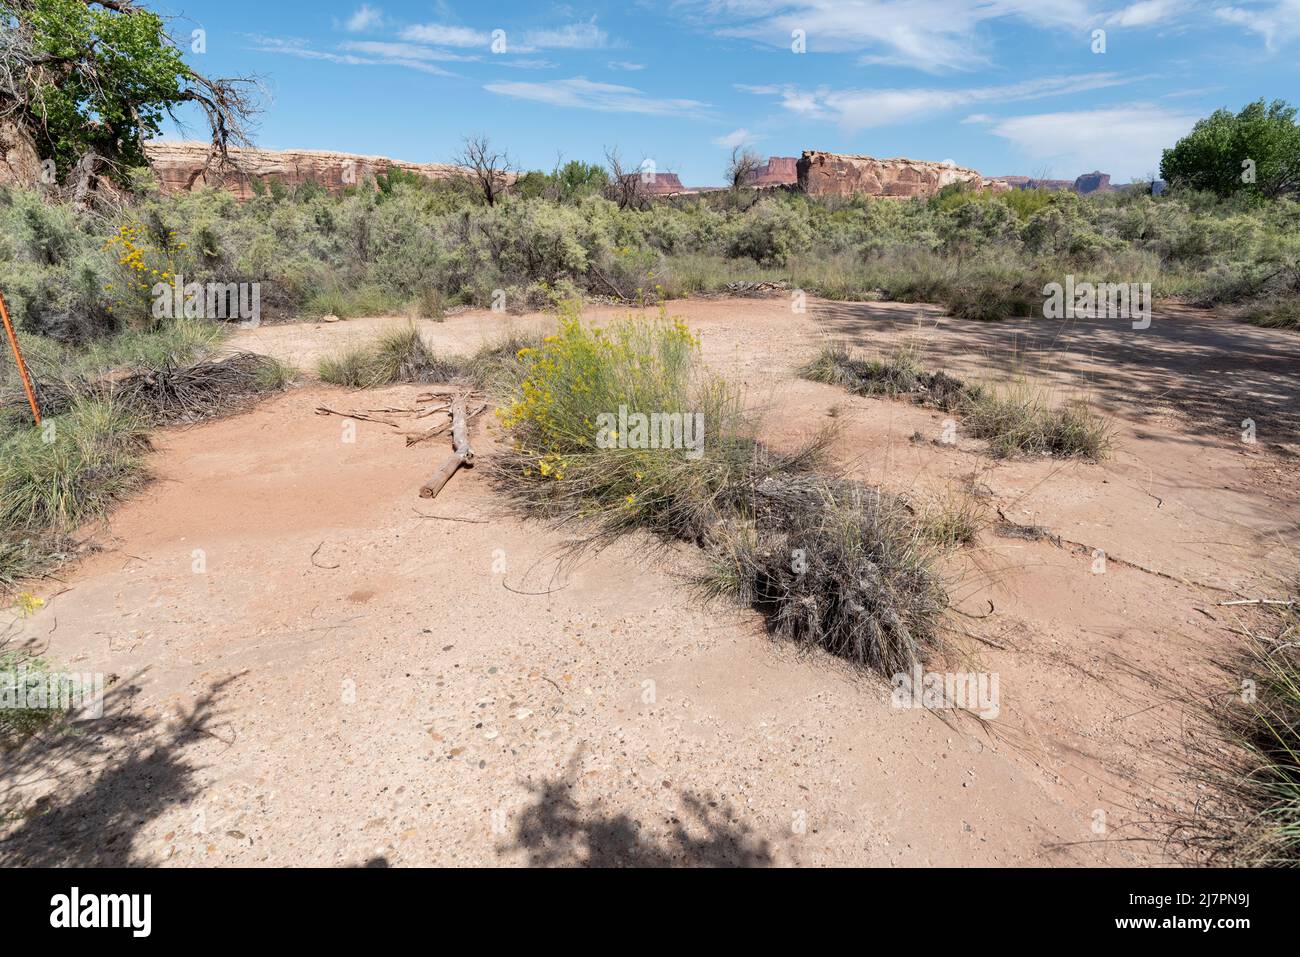 Remains of the Friendship Cruise dance floor at Anderson Bottom, Canyonlands National Park, Utah. Stock Photo